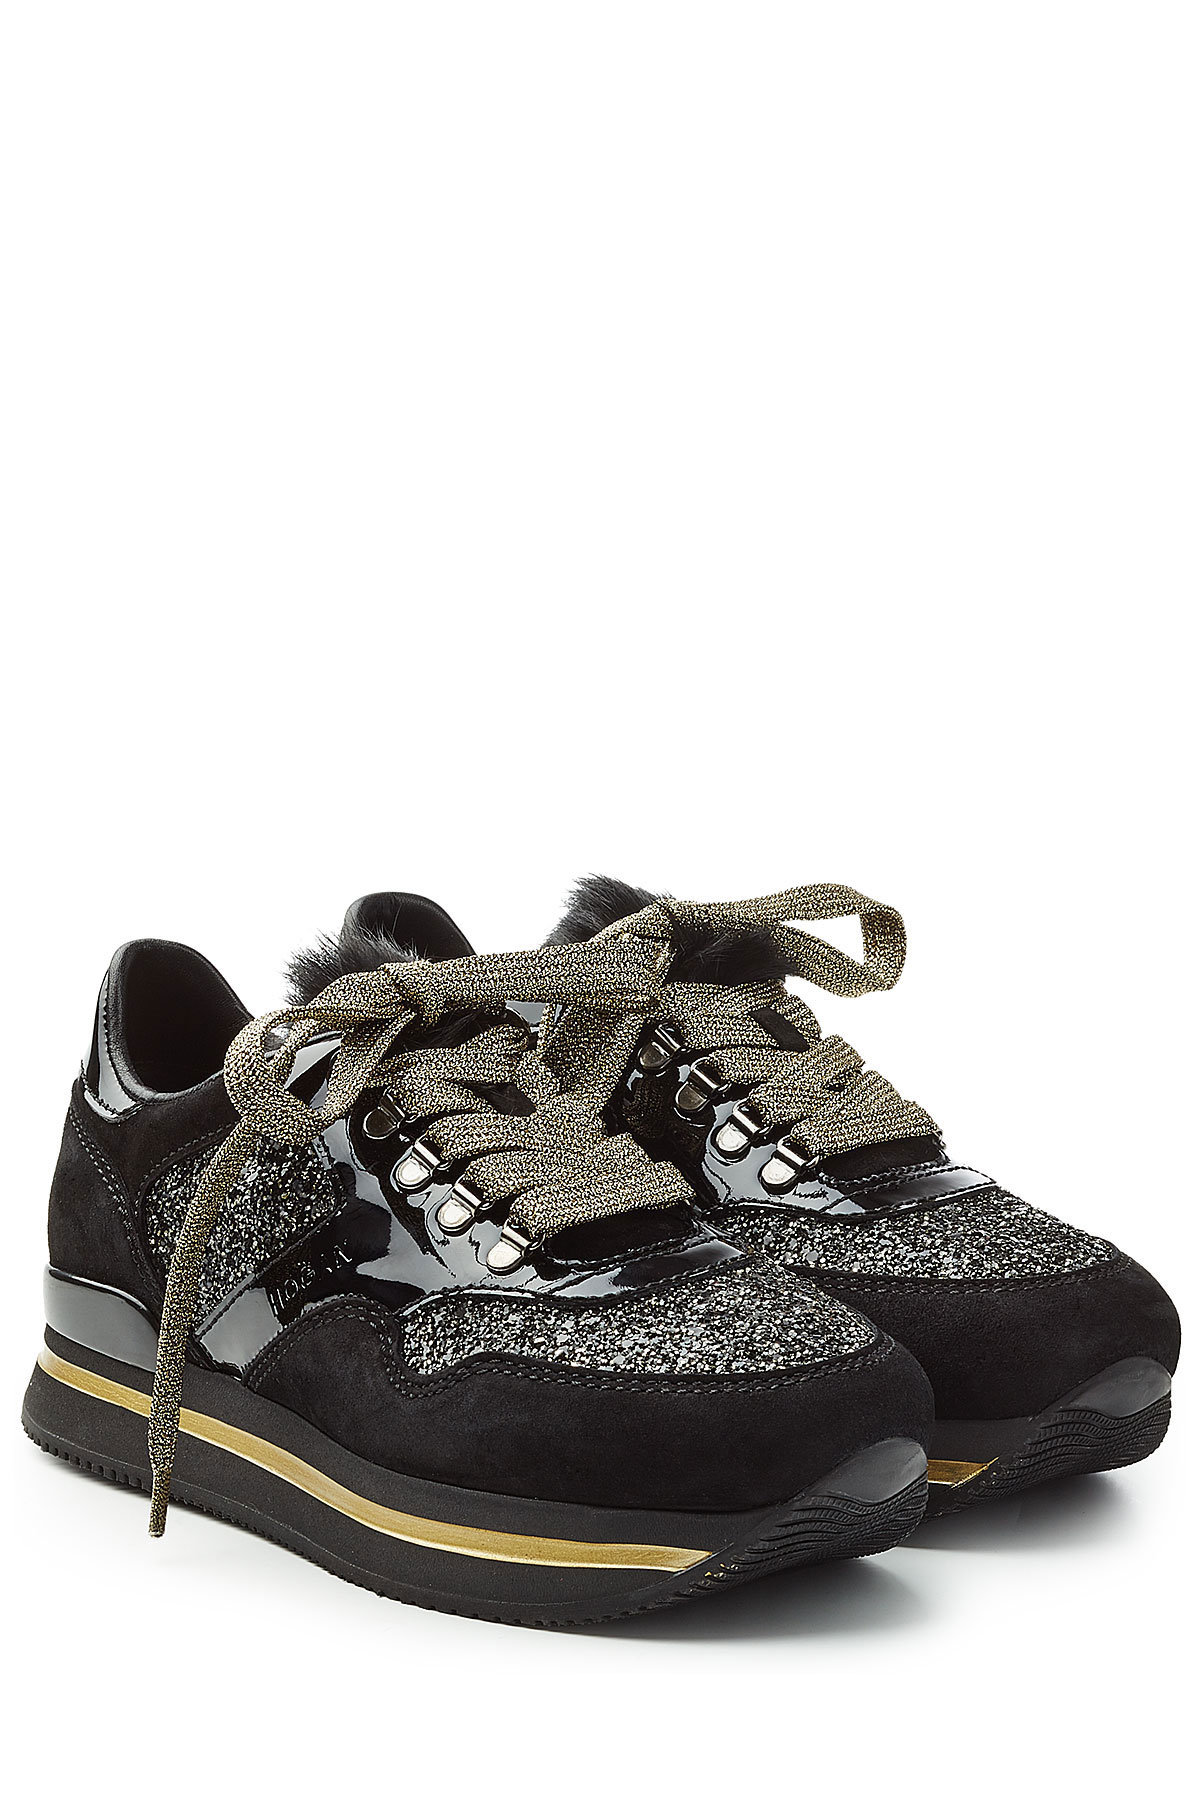 Hogan - Platform Sneakers with Suede and Glitter